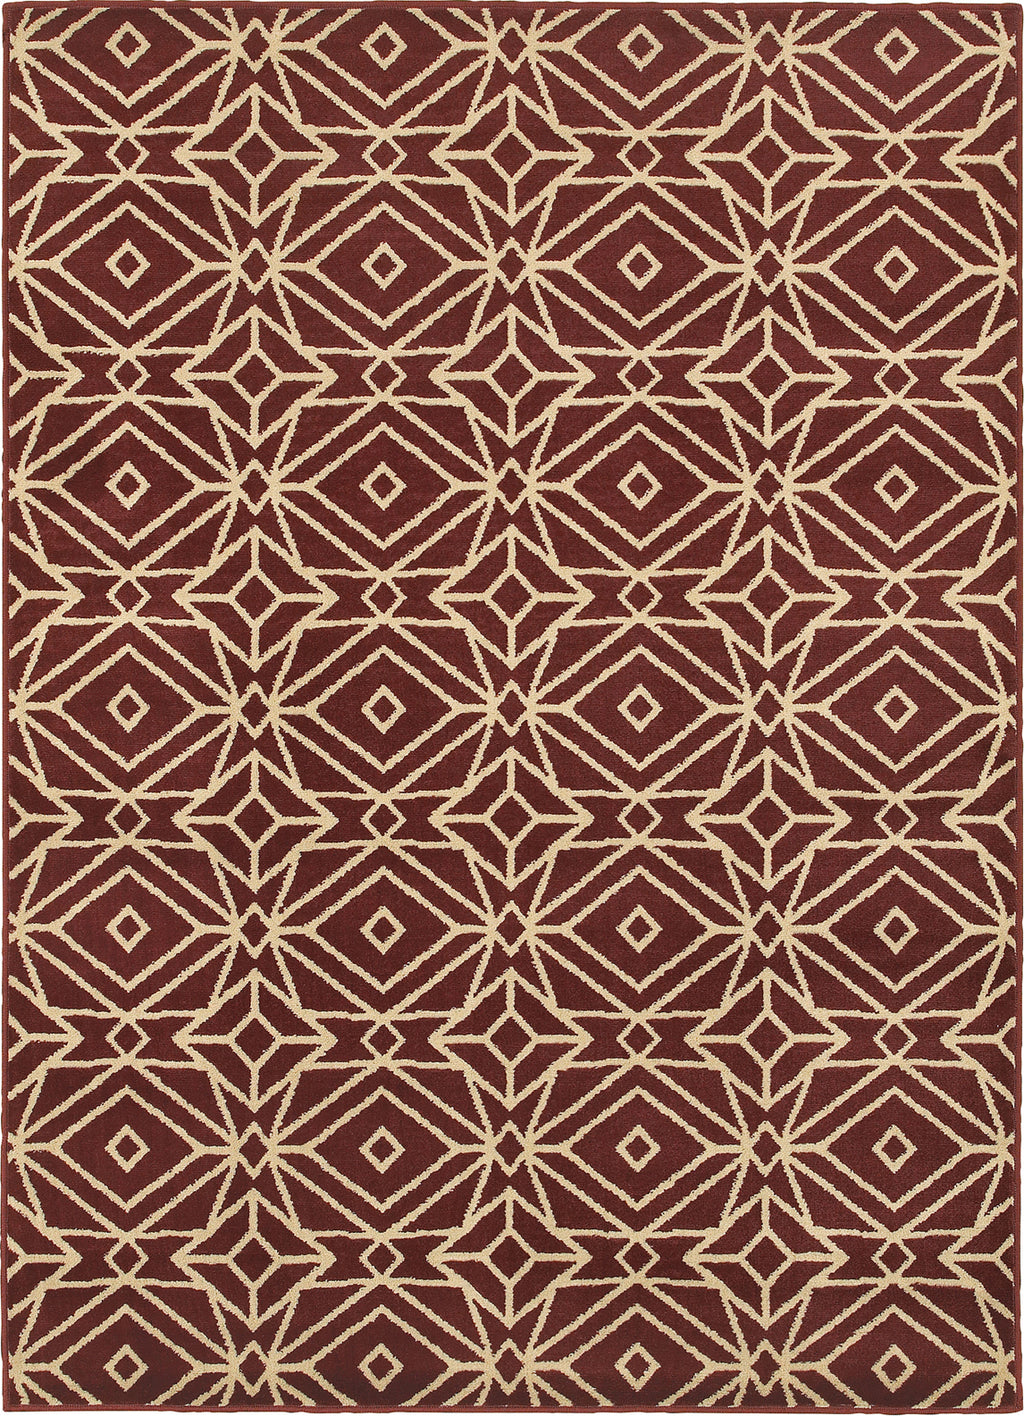 Oriental Weavers Stratton 5882B Red/Ivory Area Rug main image